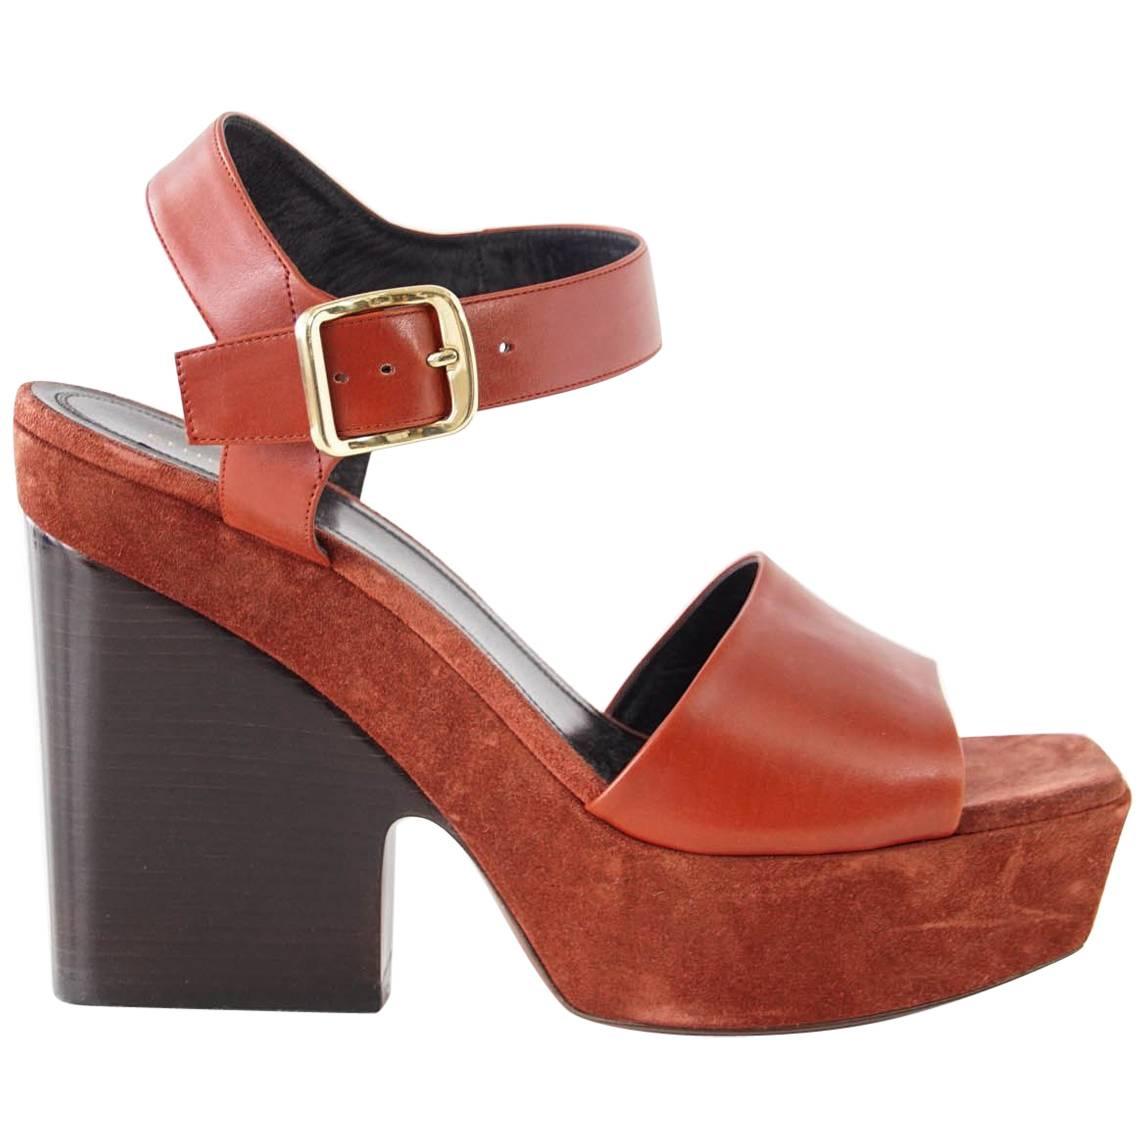 Celine Shoe Leather with Suede Platform Shaped Wood Stacked Heel 39.5 / 9.5 